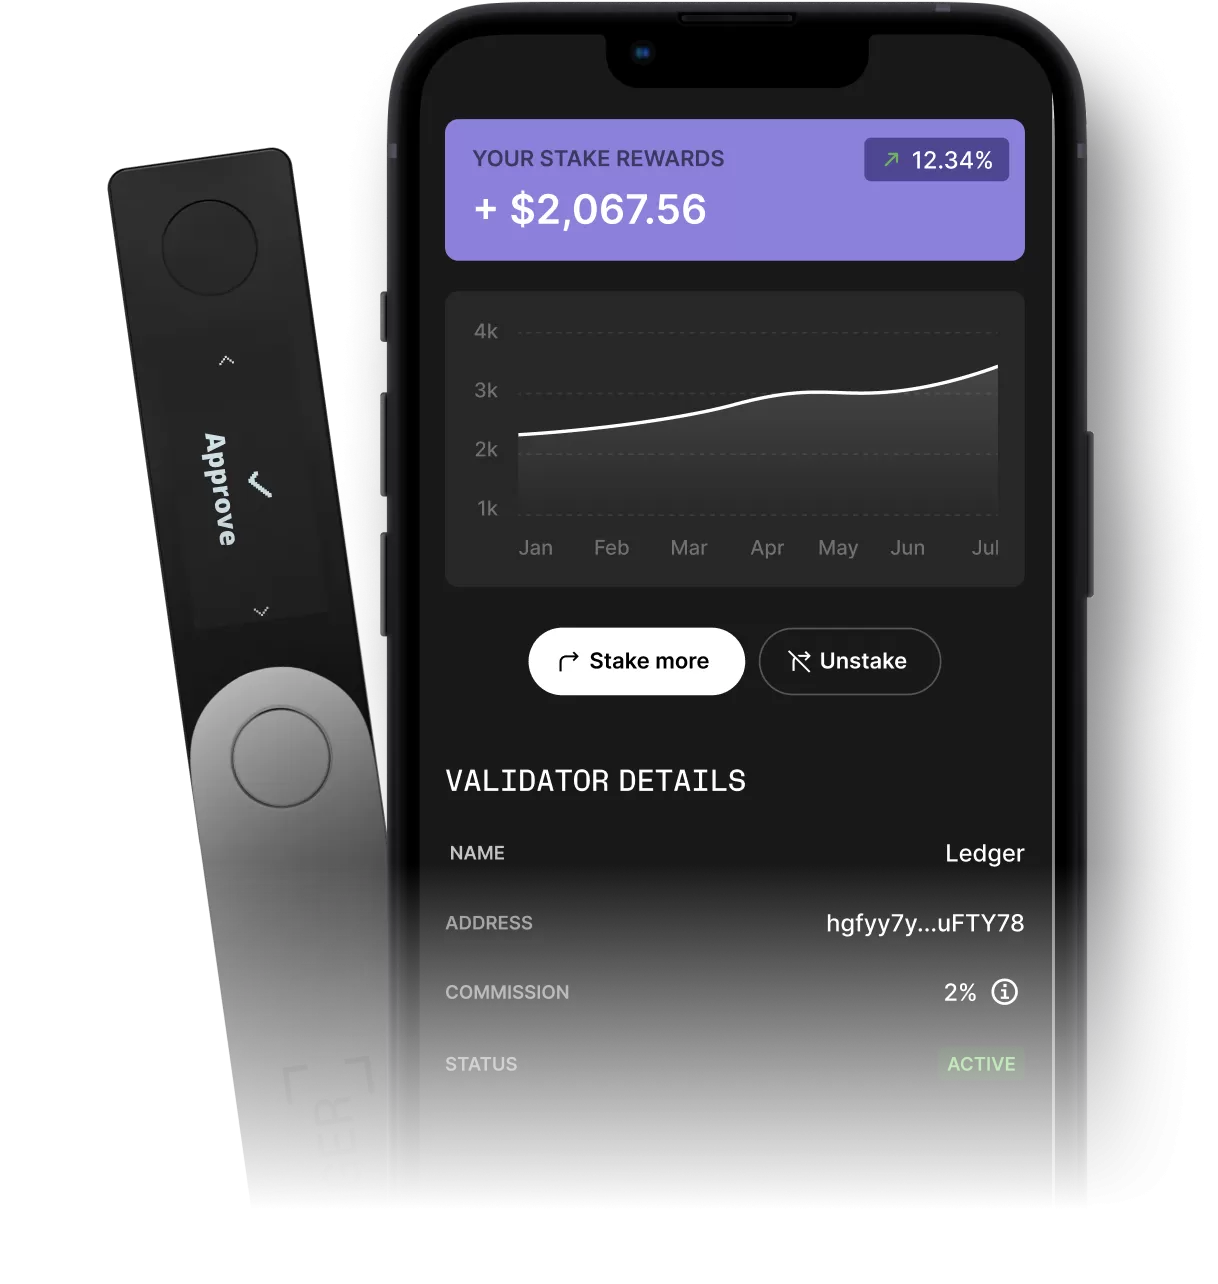 Ledger Nano S is now Compatible with the Latest Monero Wallet (Graphical User Interface) | Ledger